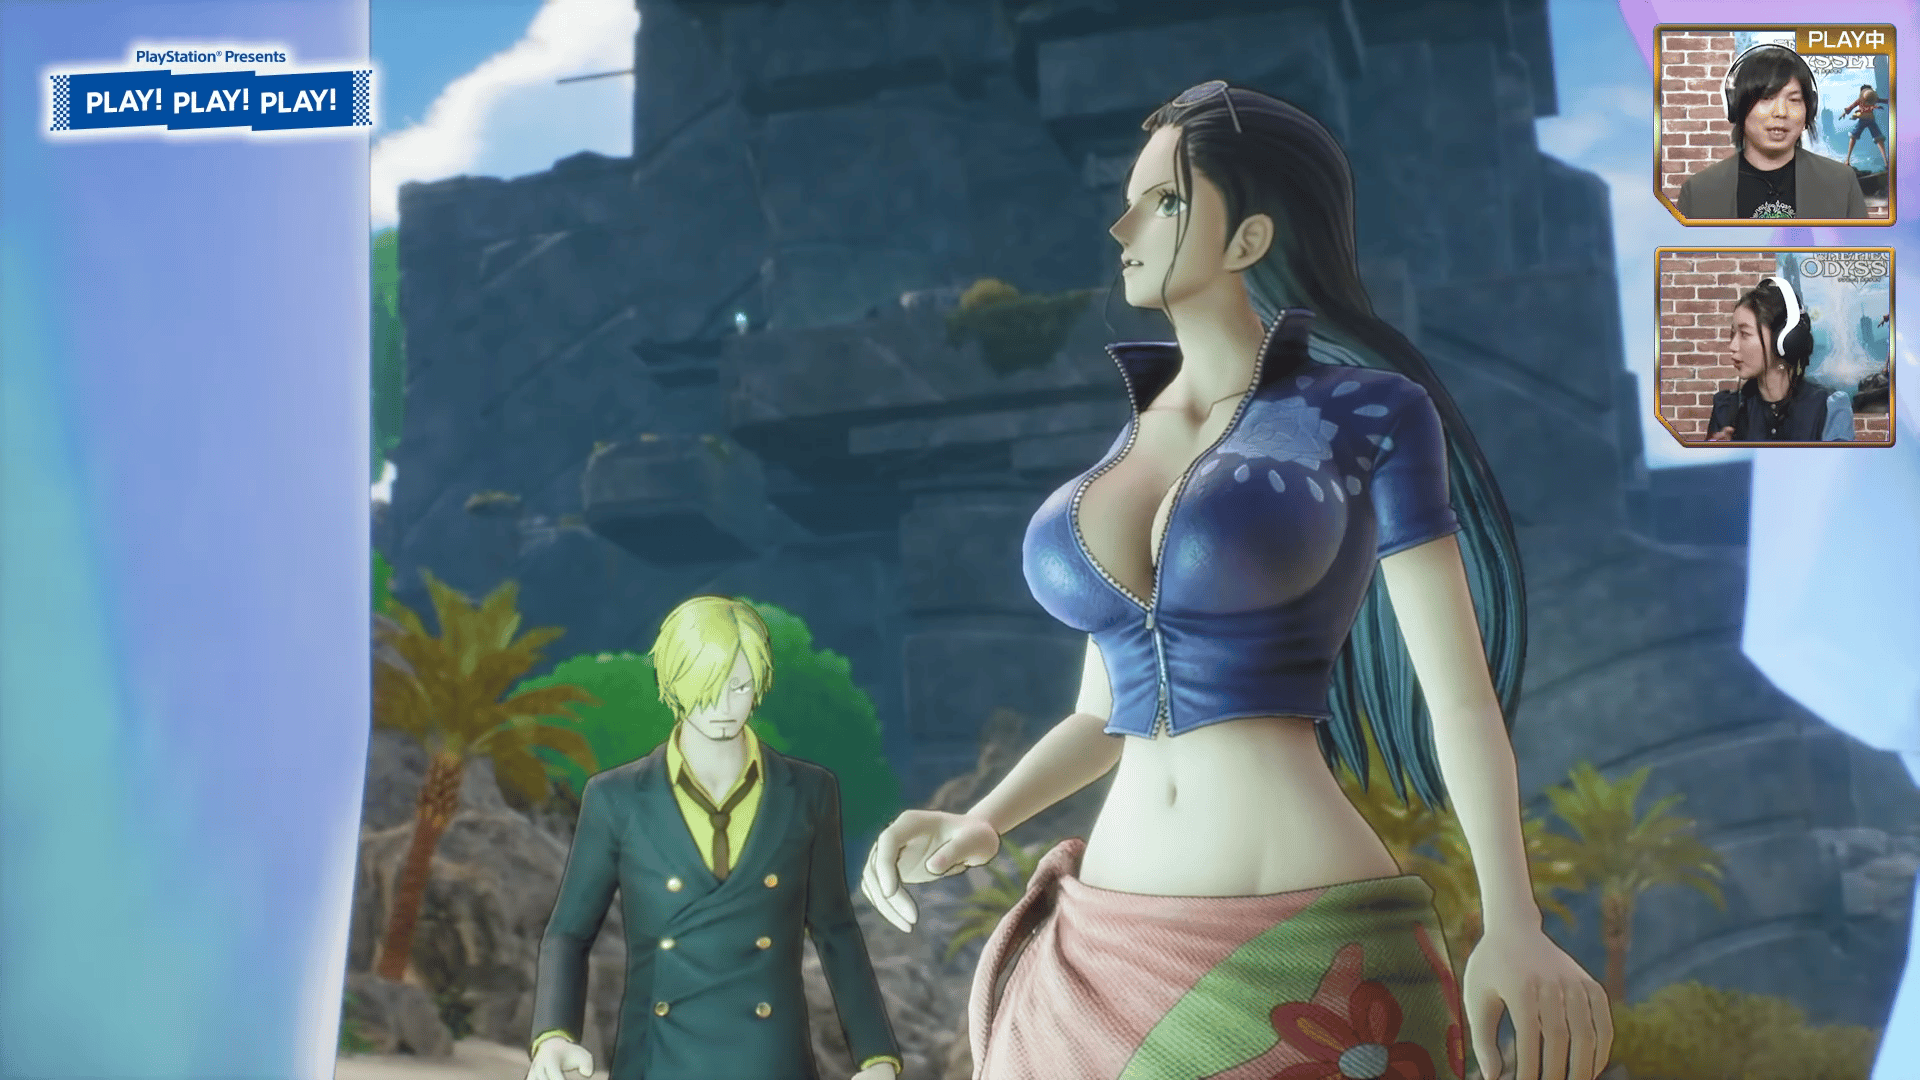 One Piece Odyssey Shares 14 Minutes of Gameplay Featuring Producer